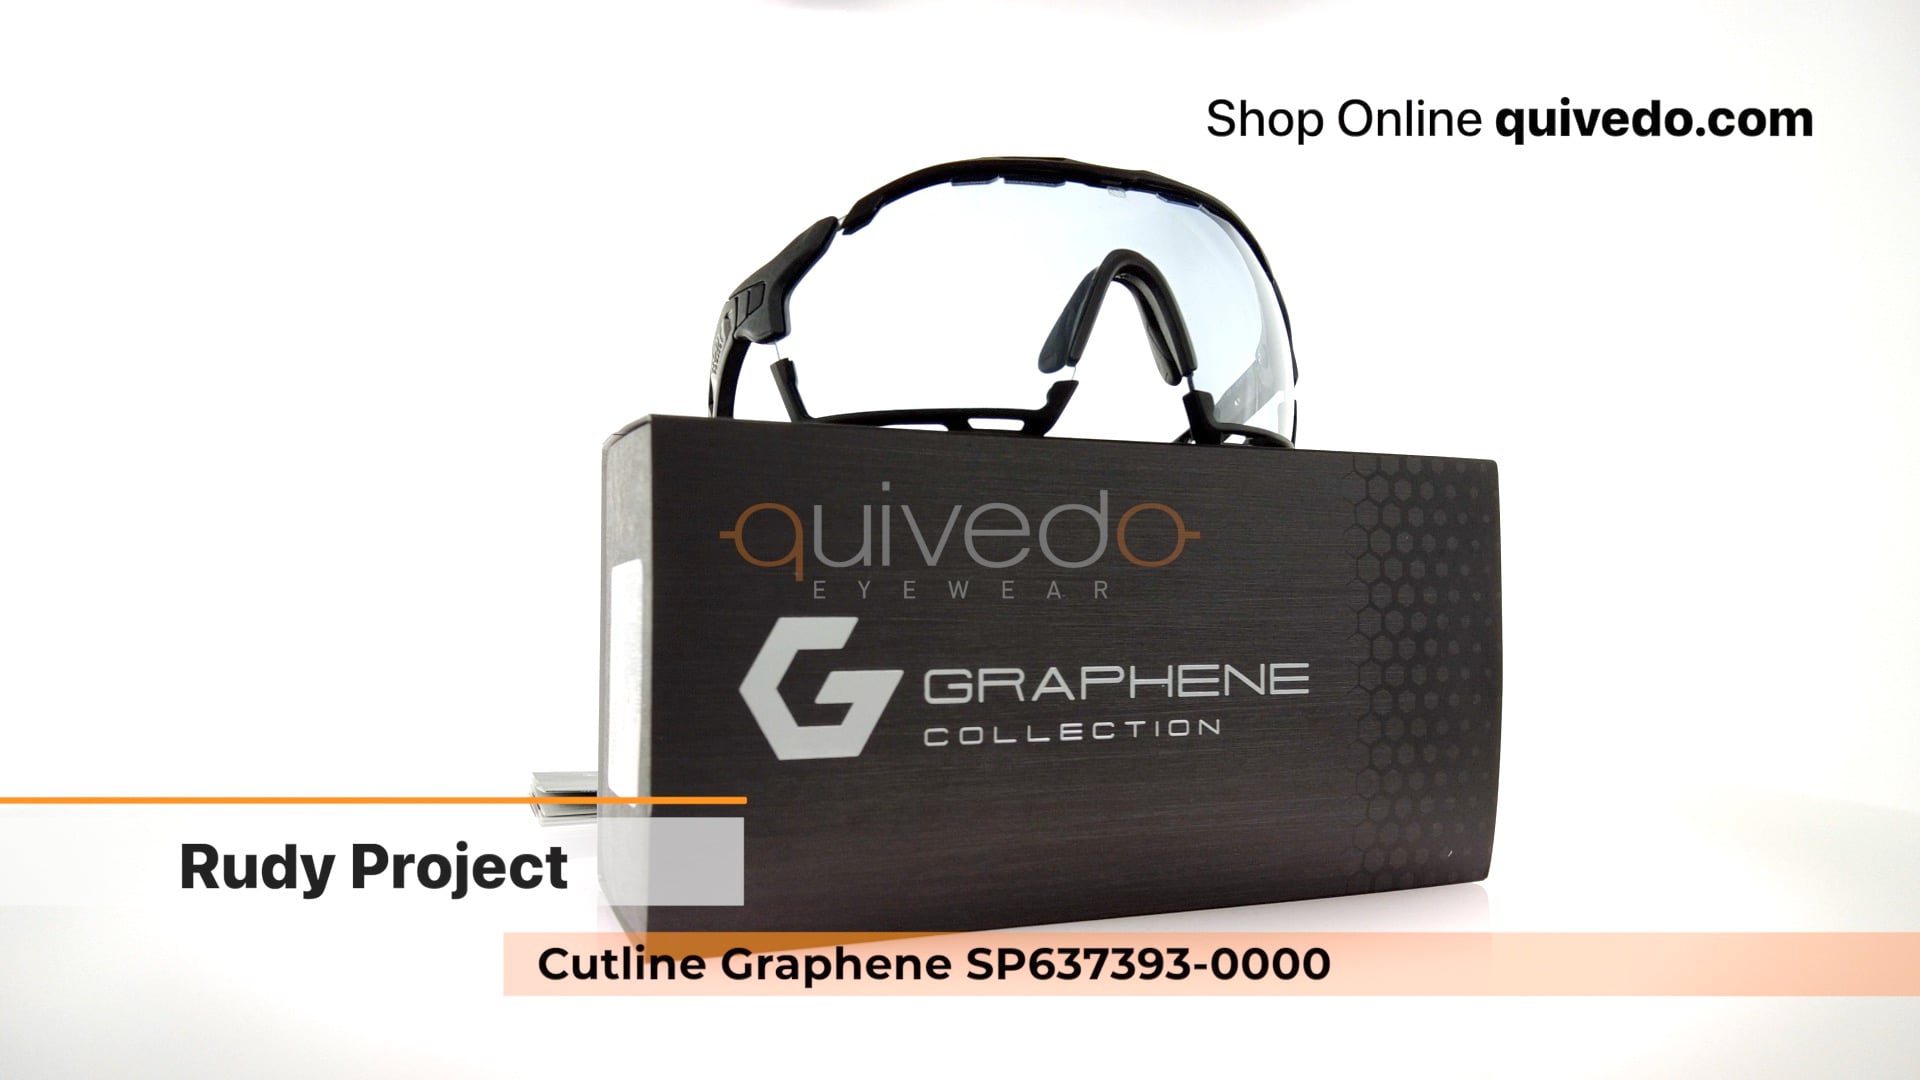 Rudy Project Cutline Graphene SP637393-0000